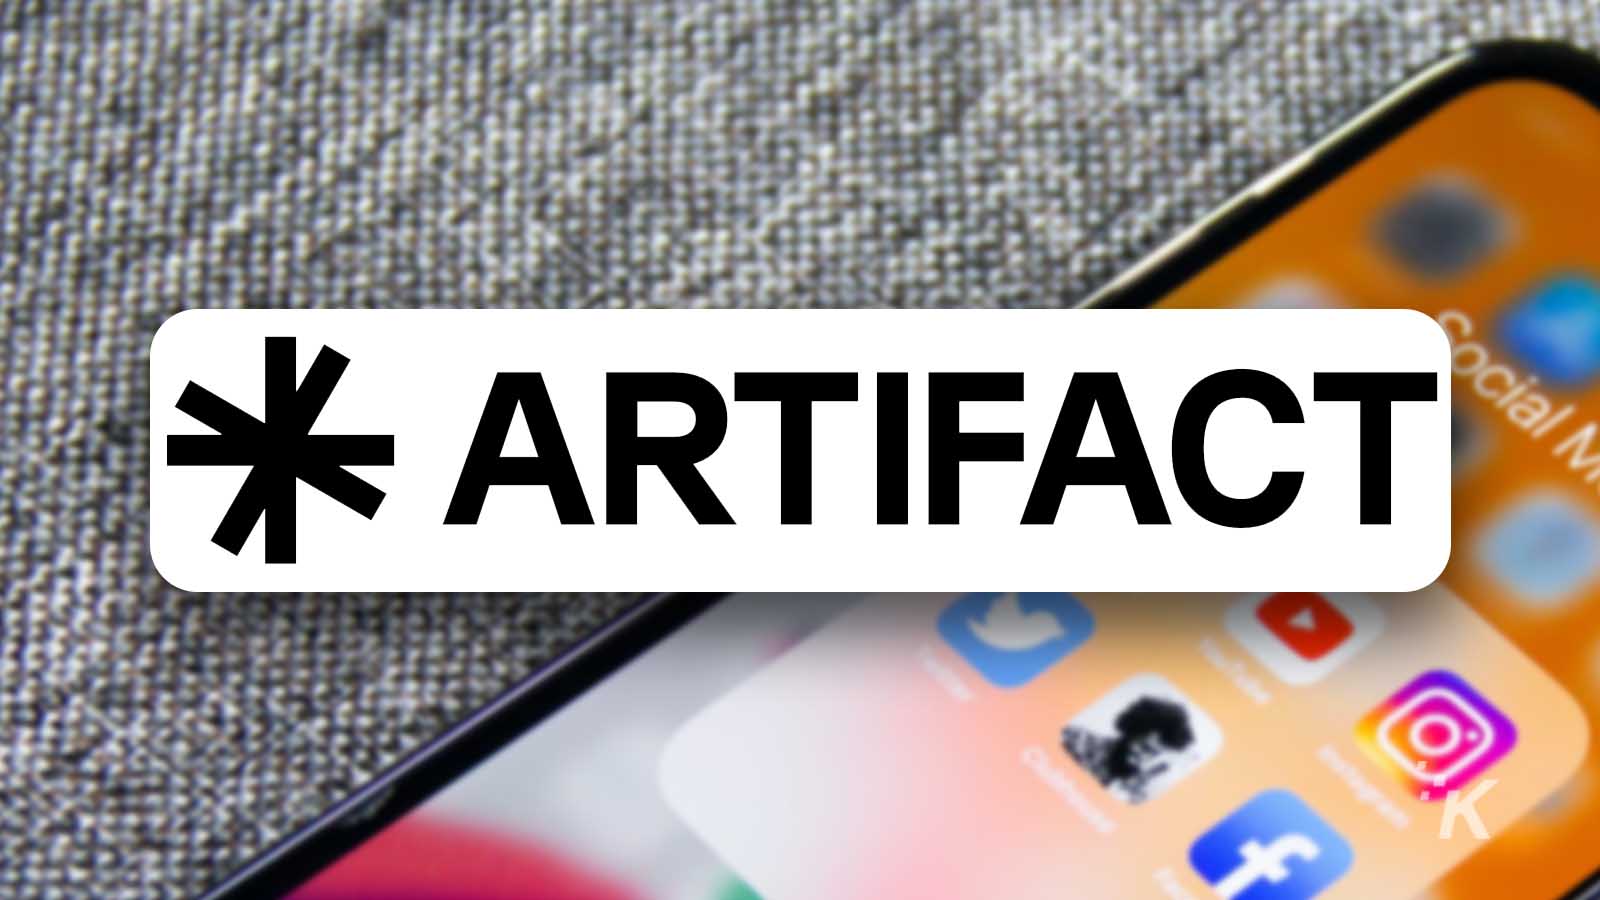 Artifact: The Personalised News Feed App Revolutionising The Fight Against Misinformation